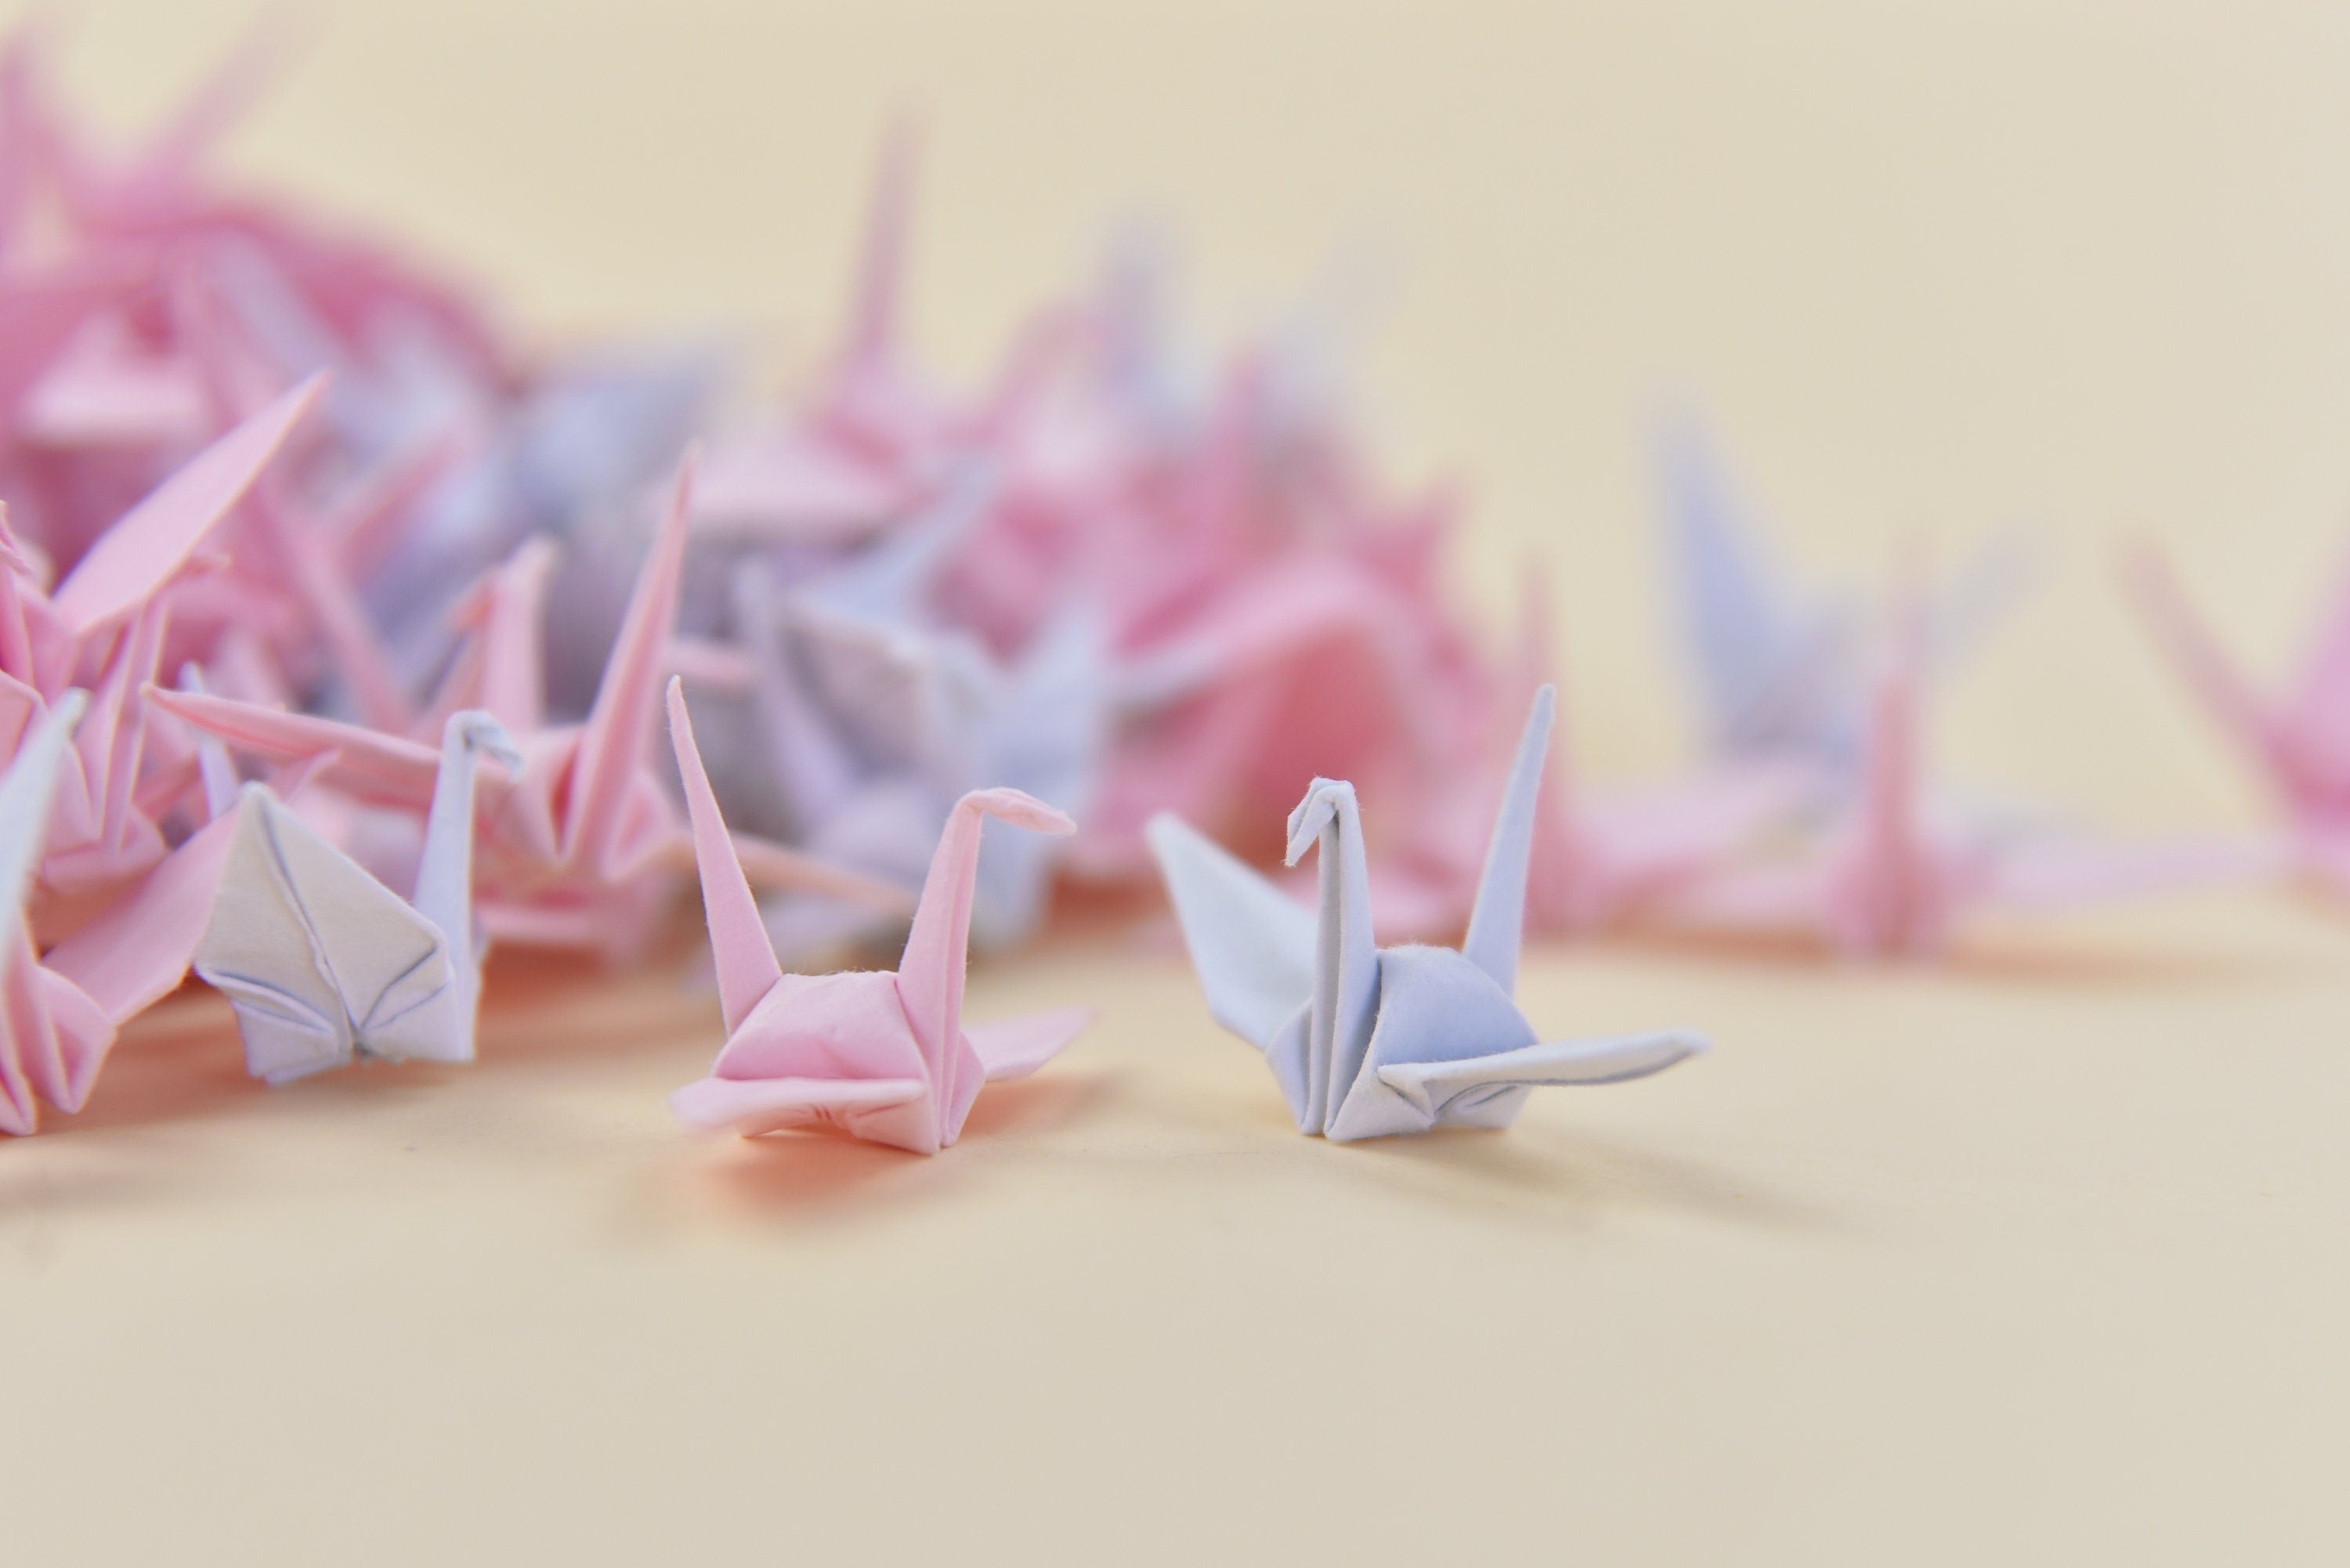 100 Pink Shade Origami Paper Crane Made of 1.5 inches-Origami crane for Wedding, Valentine's Gift, Christmas by OrigamiPolly